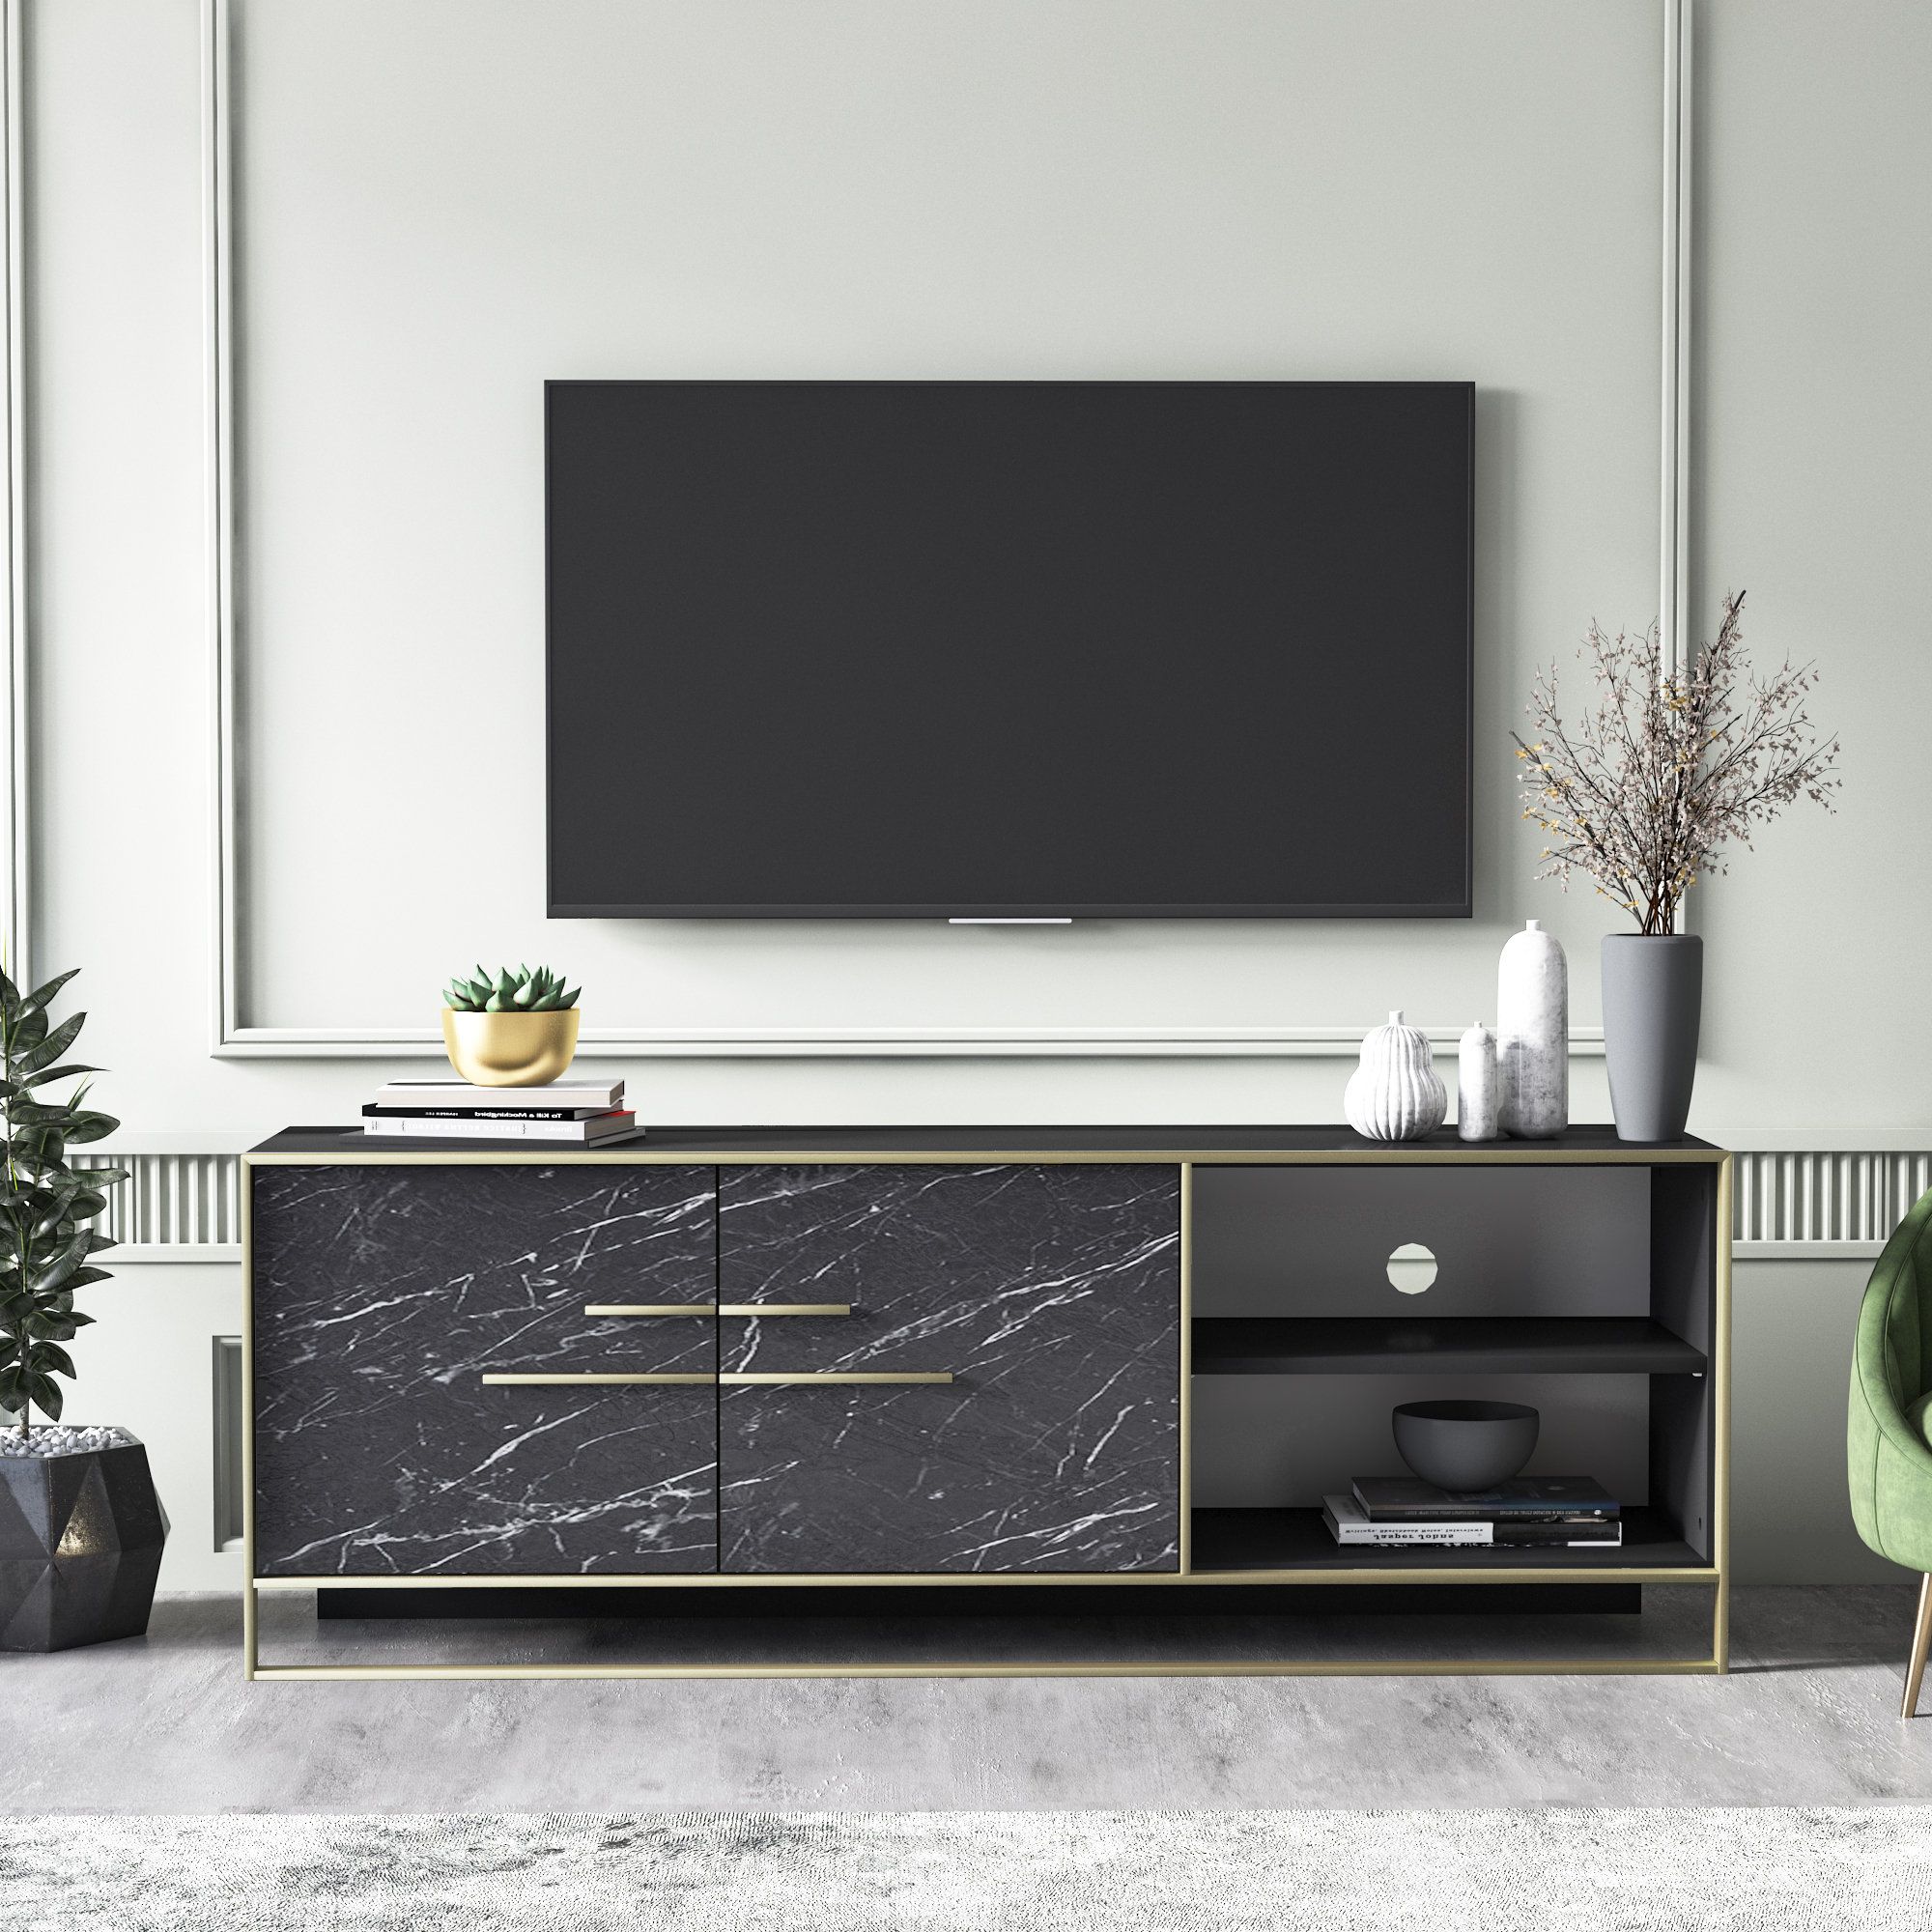 Polkana Black 160 Cm Wide Natural Marble Pattern Tv Unit / Tv | Etsy With Regard To Black Marble Tv Stands (Gallery 2 of 20)